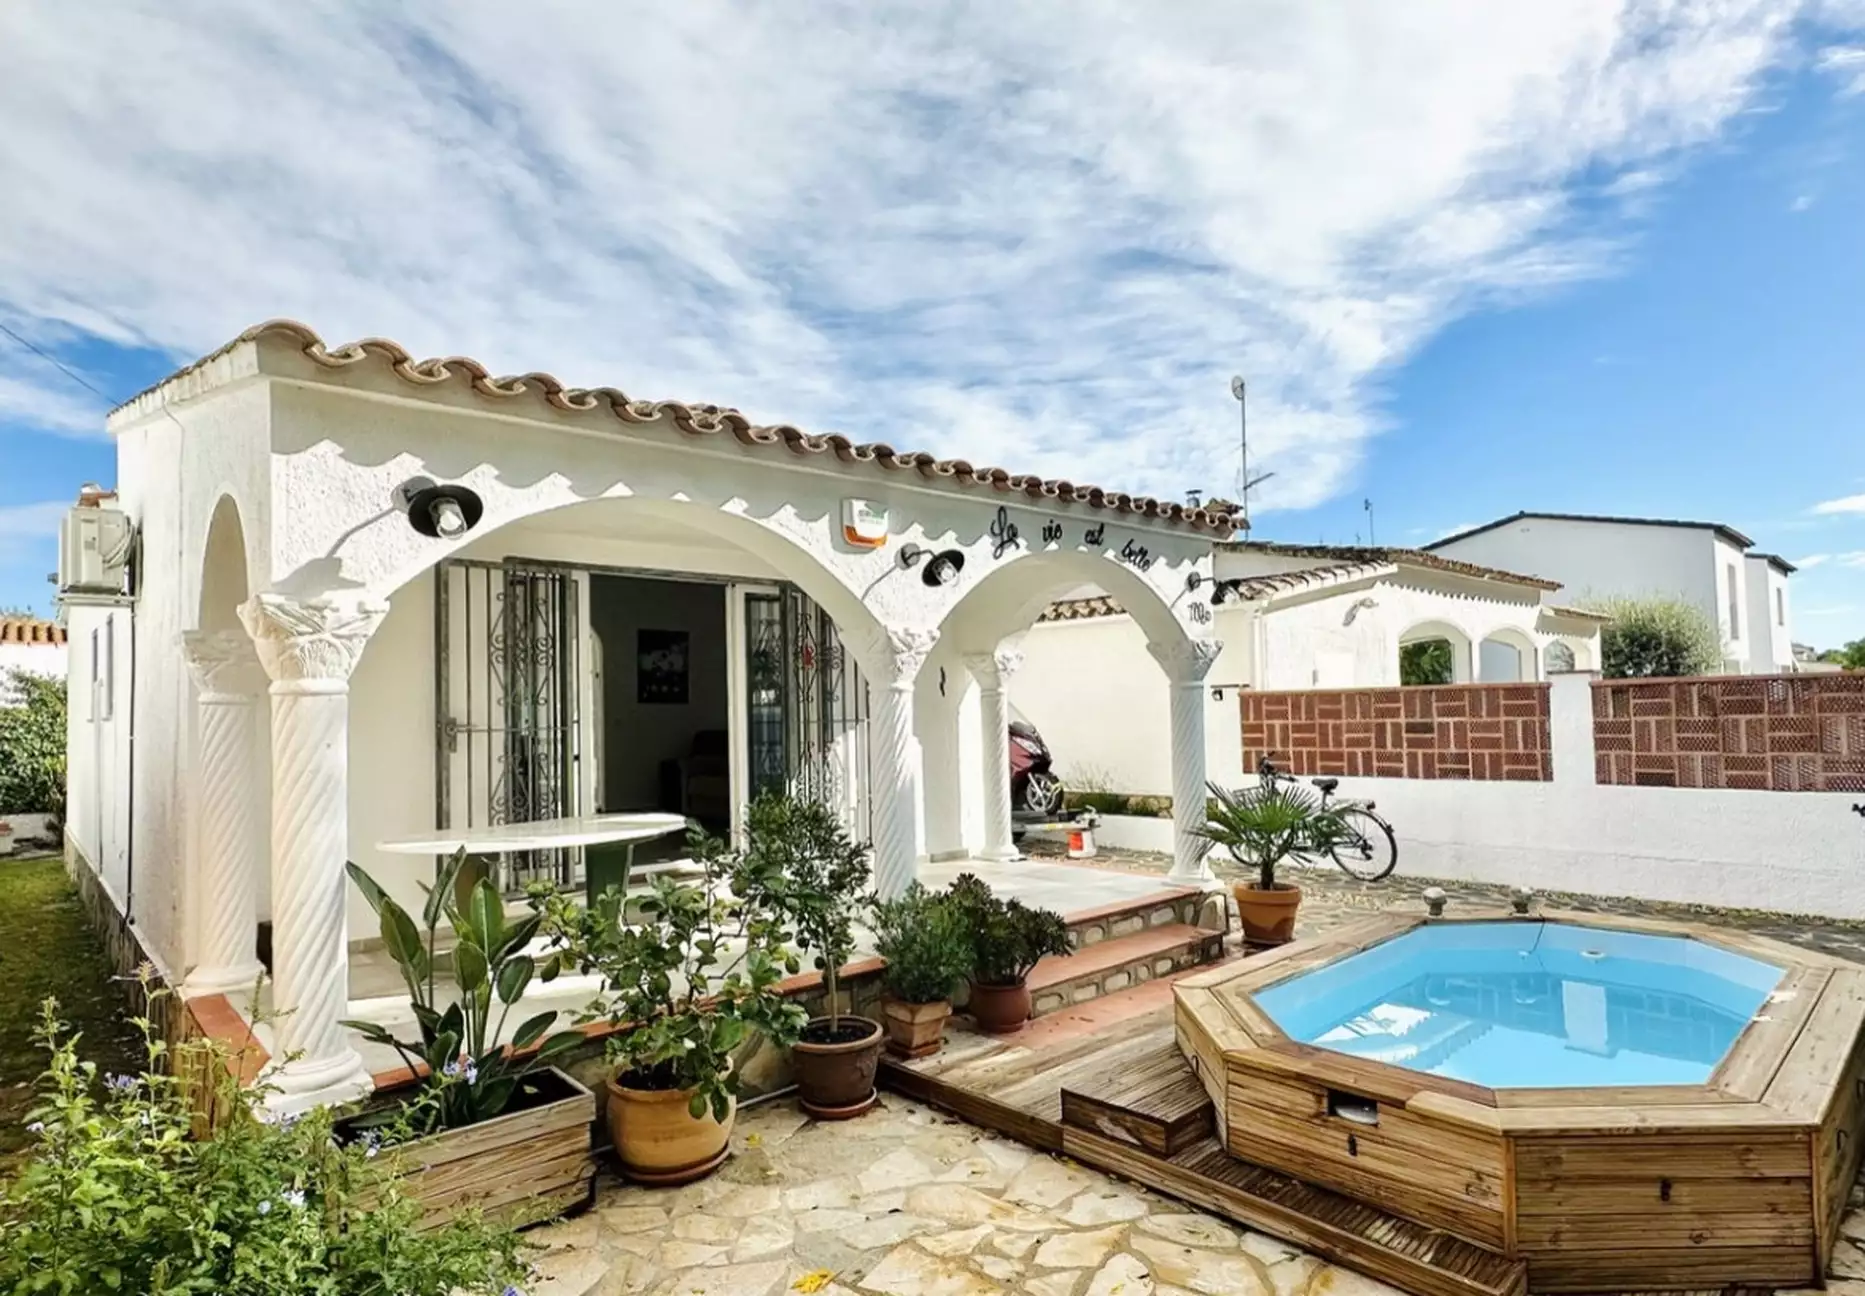 Renovated ground floor house with pool and garage for sale in Empuriabrava.